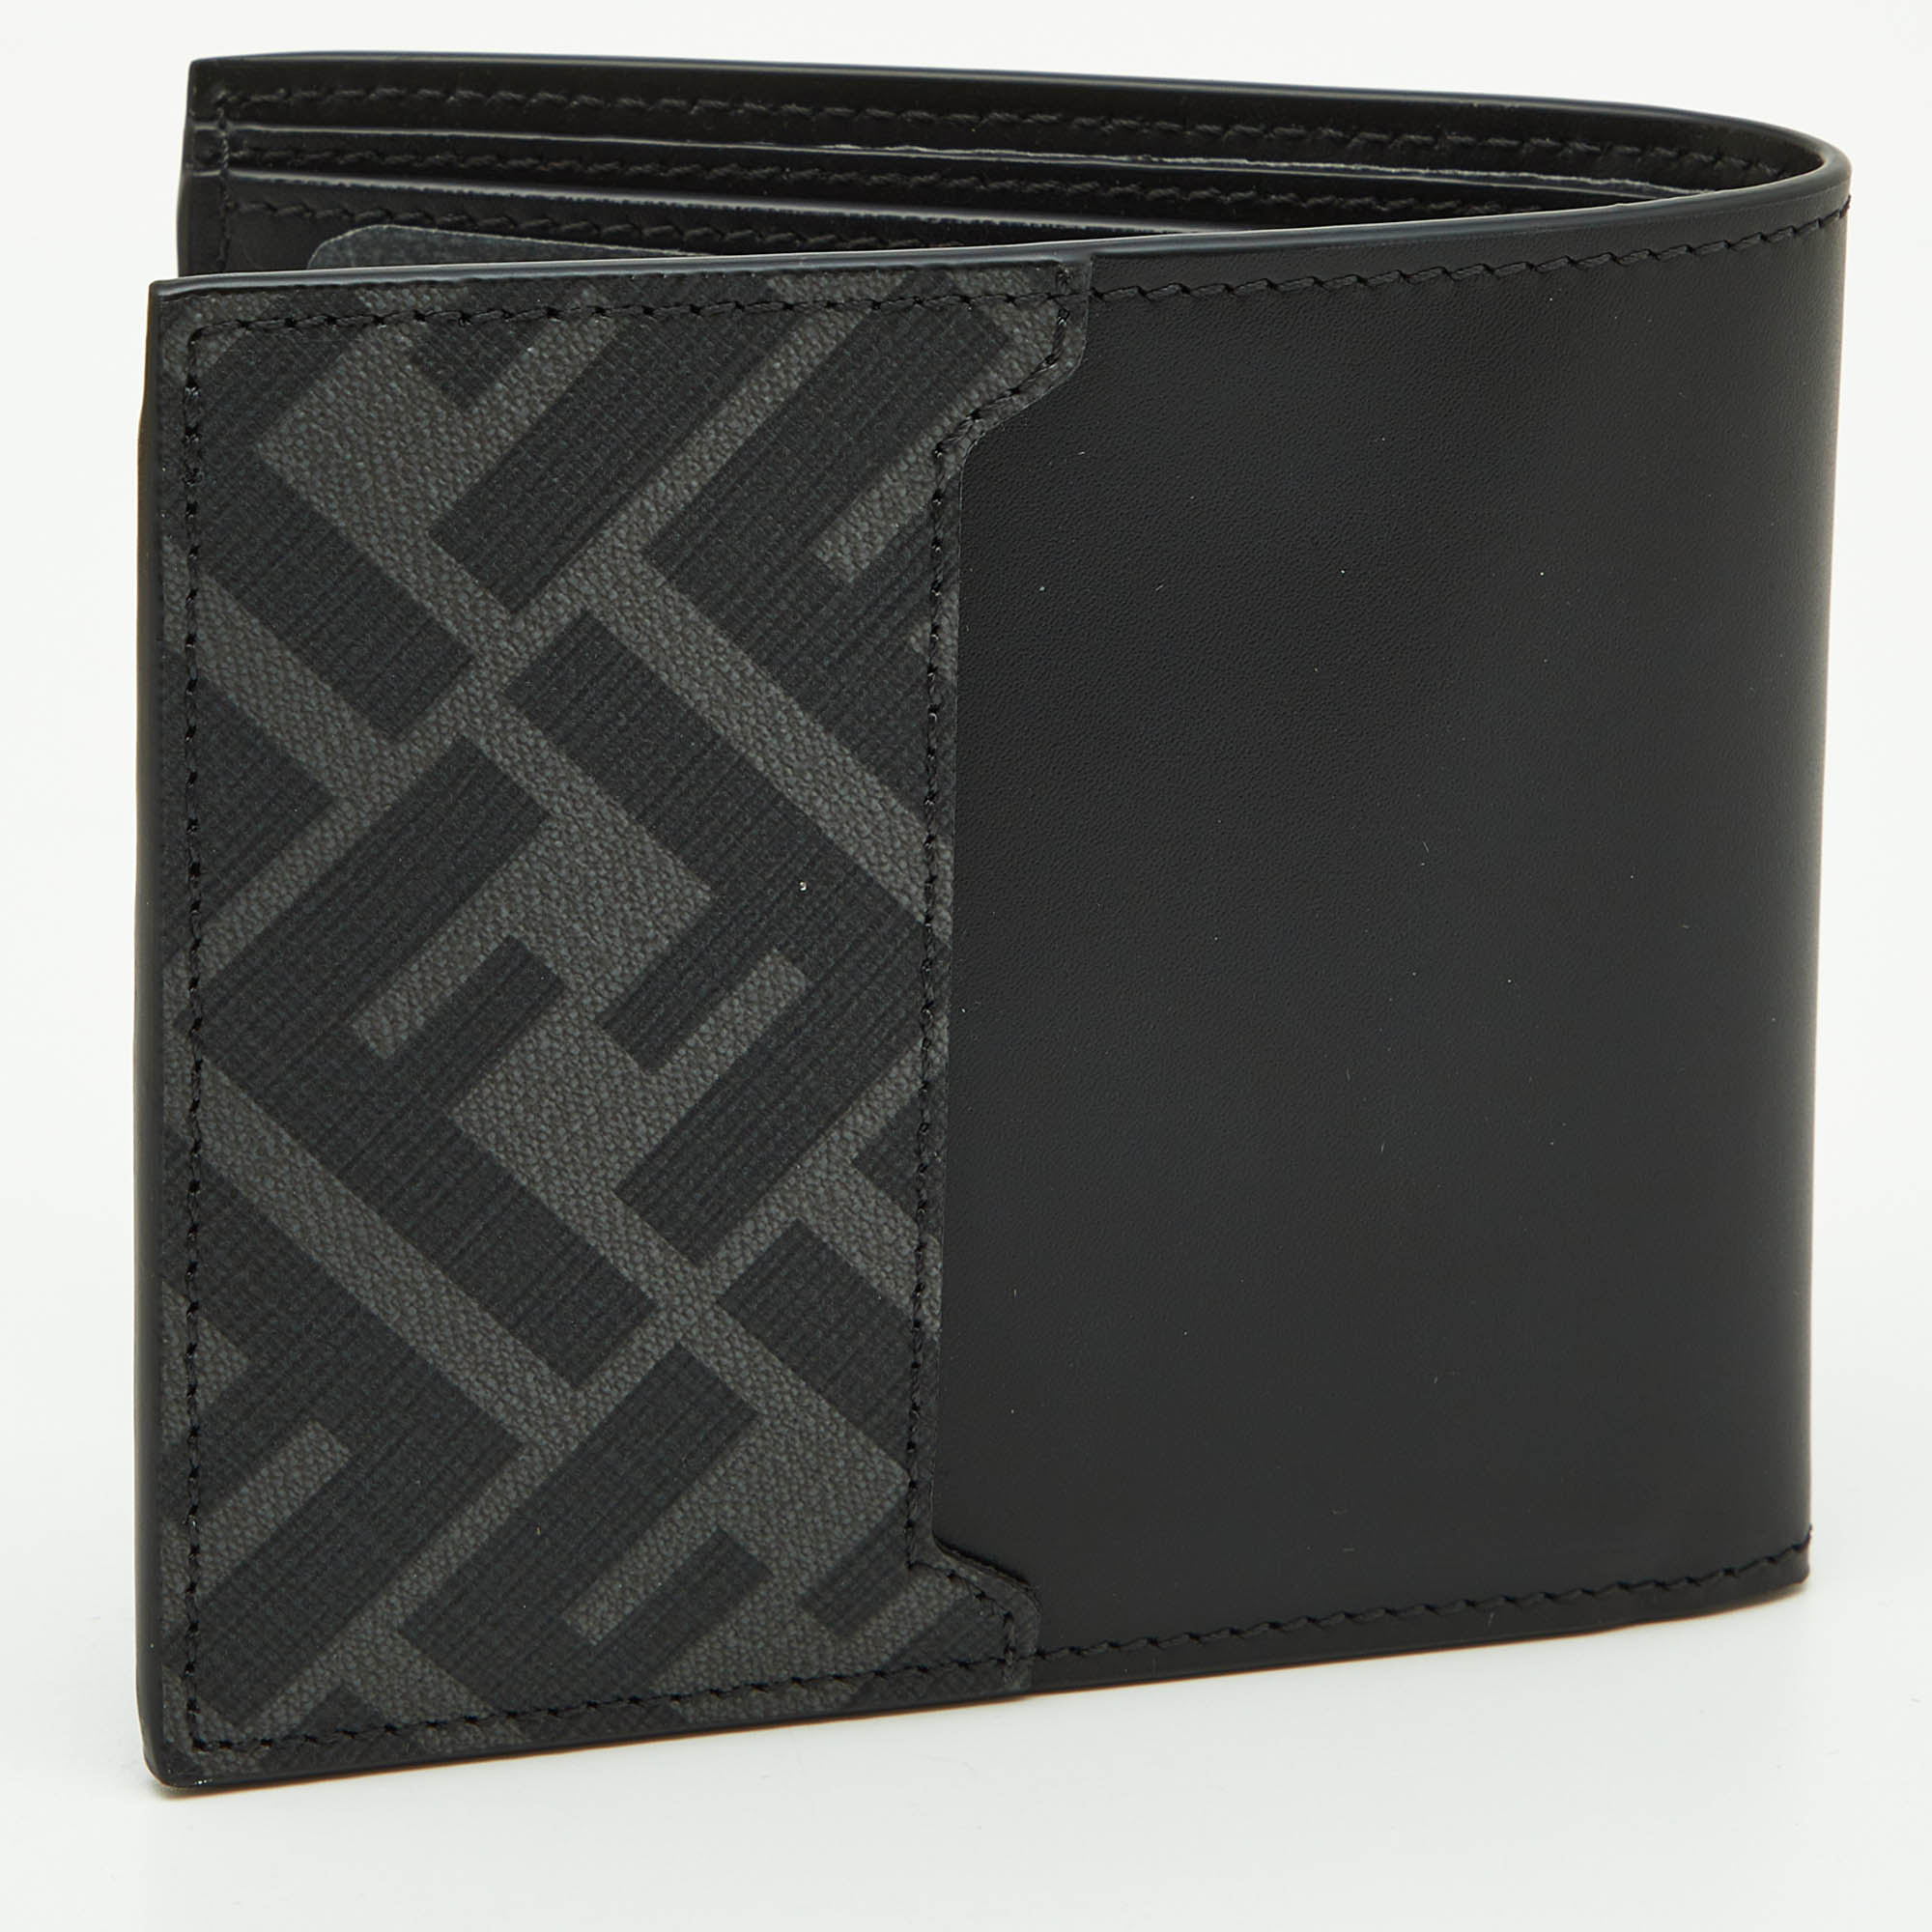 Fendi Black Leather And Coated Canvas Bifold Wallet